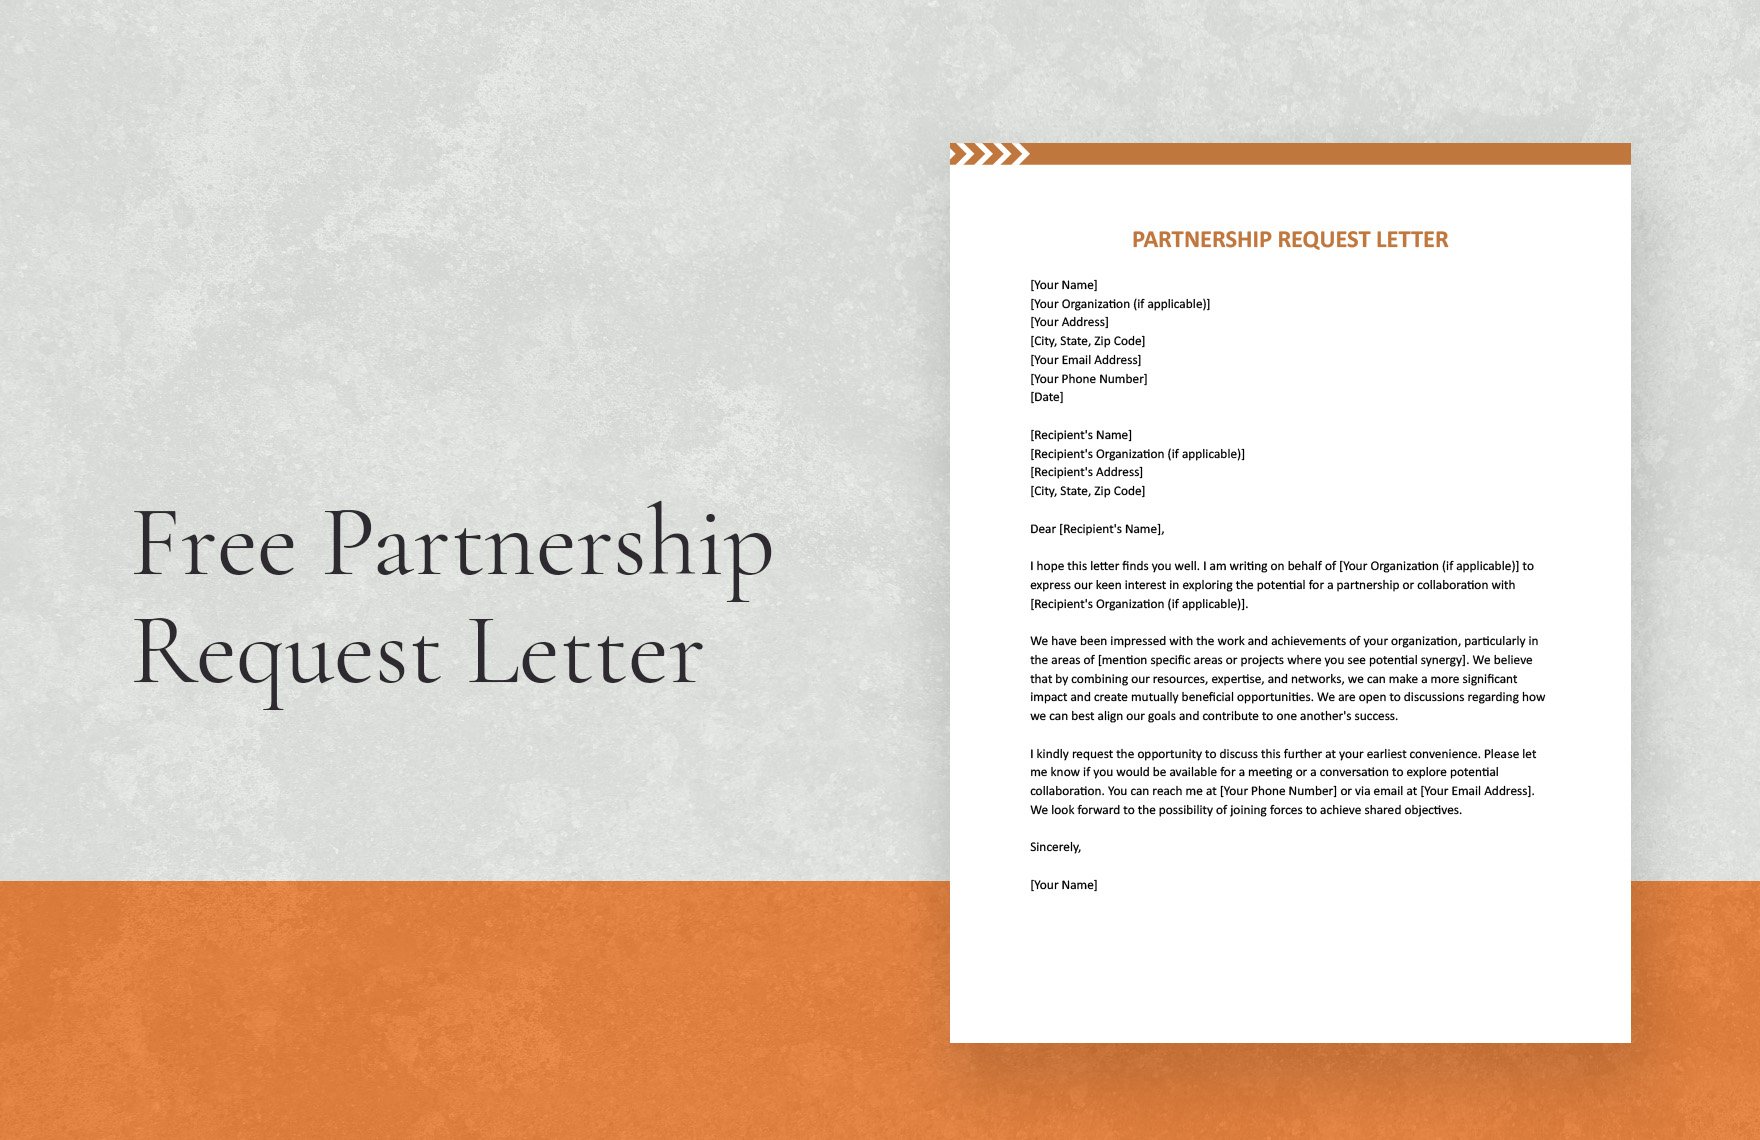 Free Partnership Request Letter in Word, Google Docs